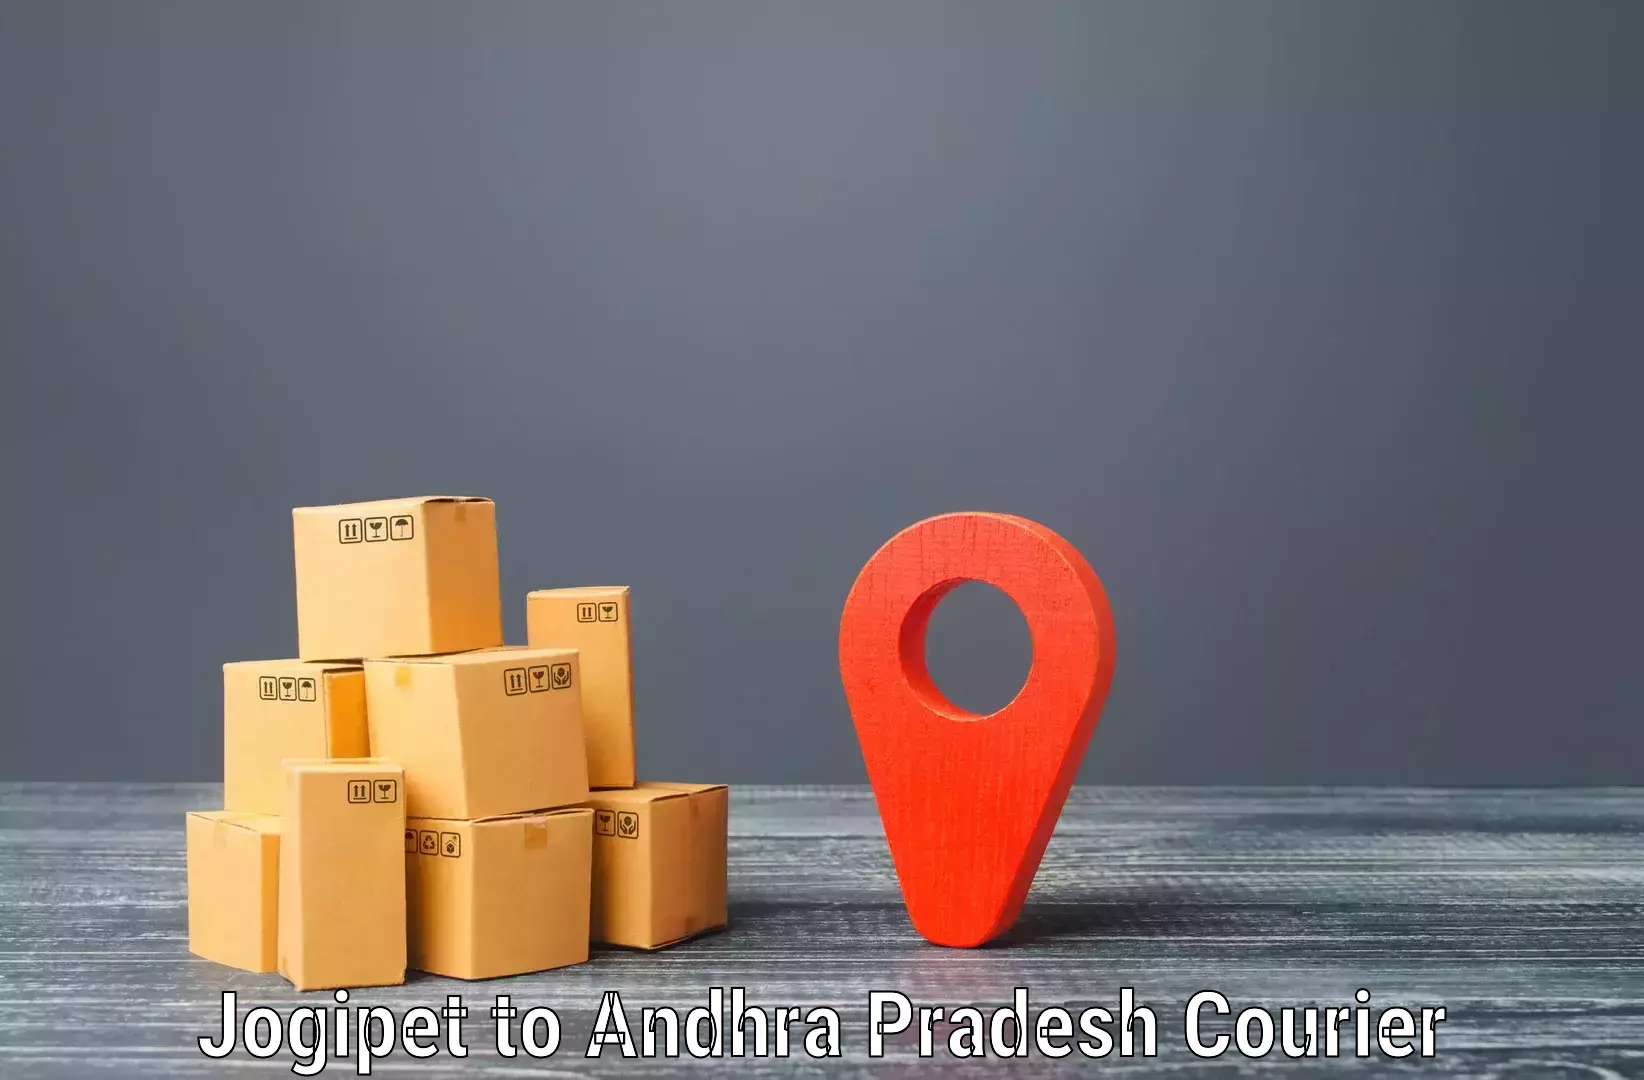 Business delivery service Jogipet to Andhra Pradesh